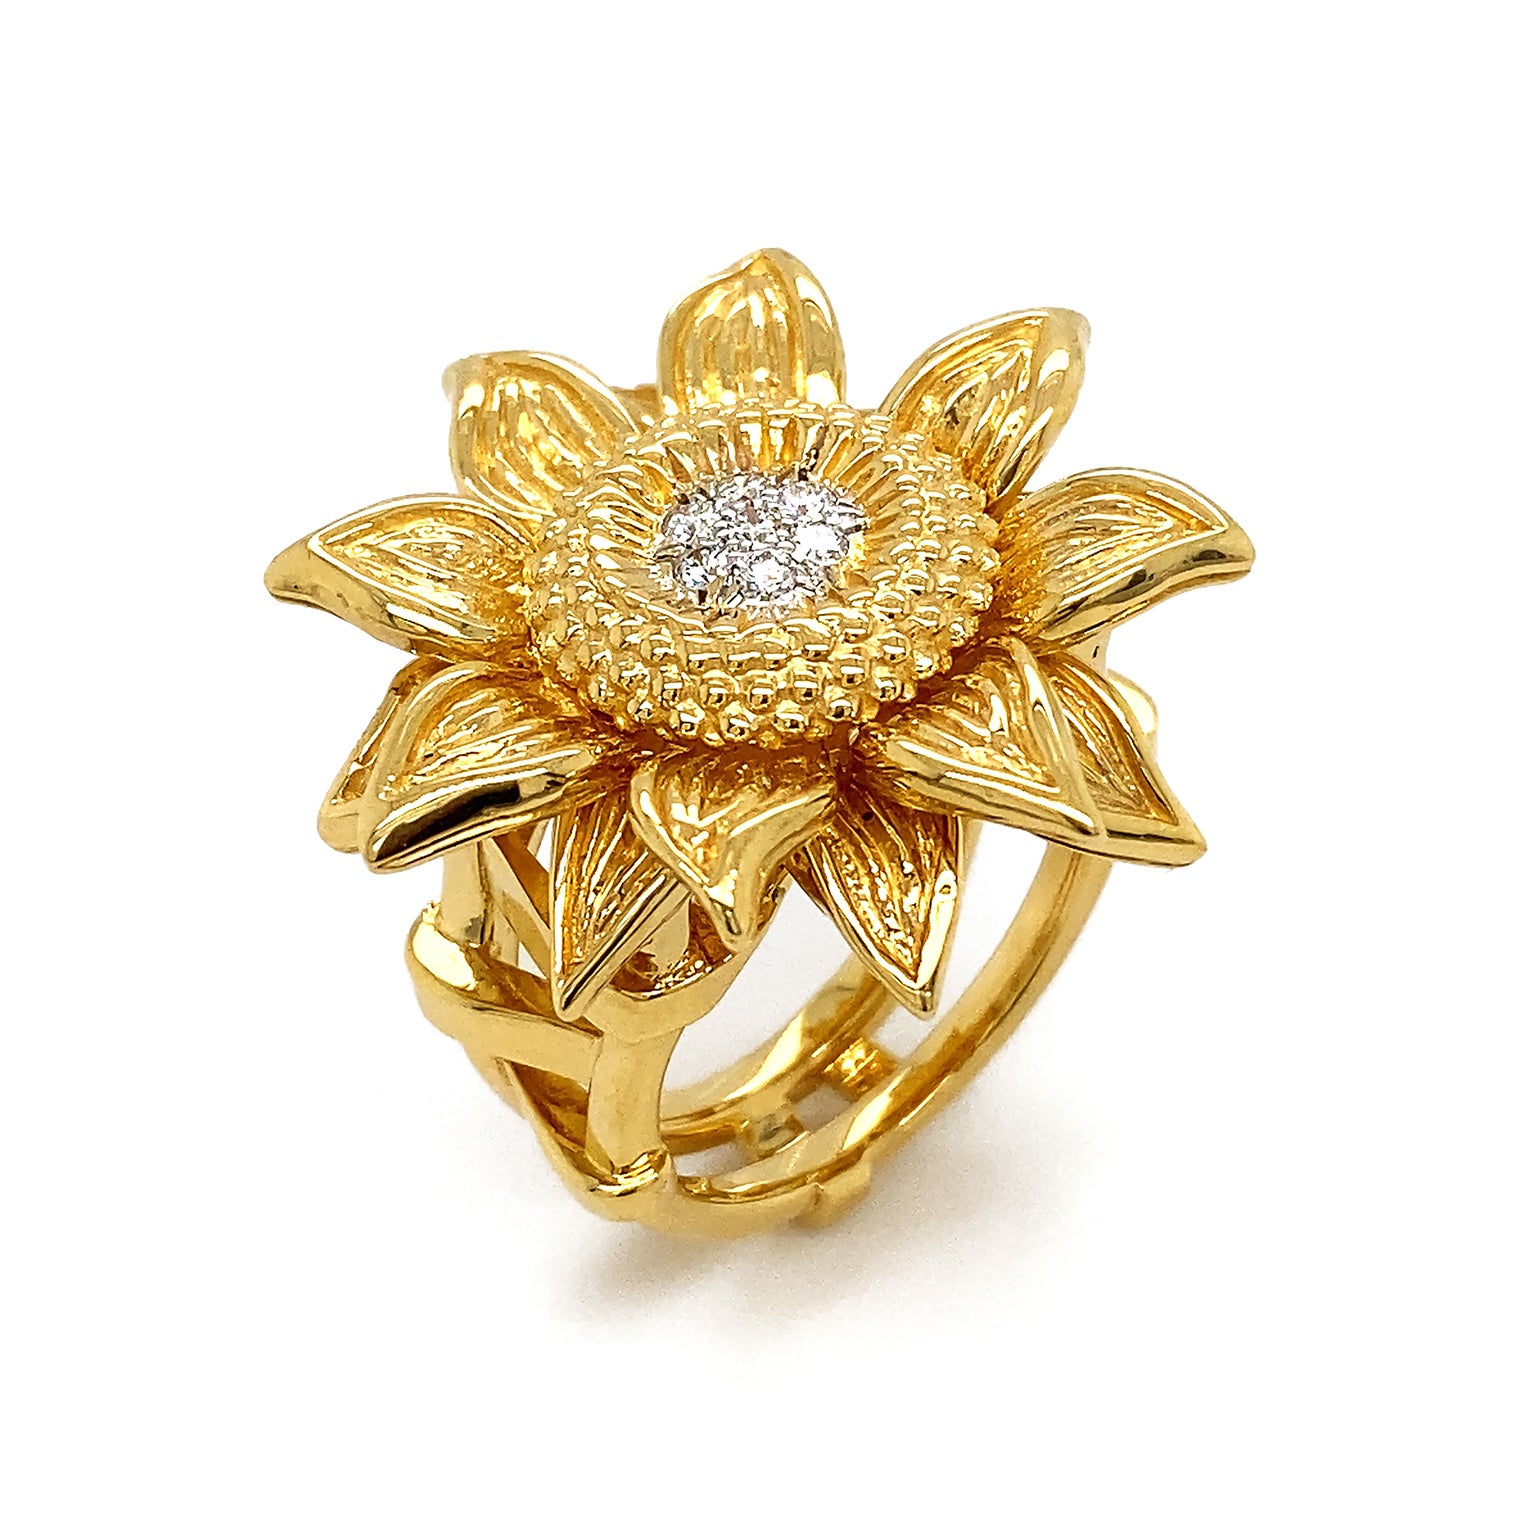 18k yellow gold glows as a fully bloomed sunflower. Petals are textured with subtle differences, creating realism and intrigue. Disk flowers encompass brilliant cut diamonds in the heart of the ring for a radiant light. The total weight of the